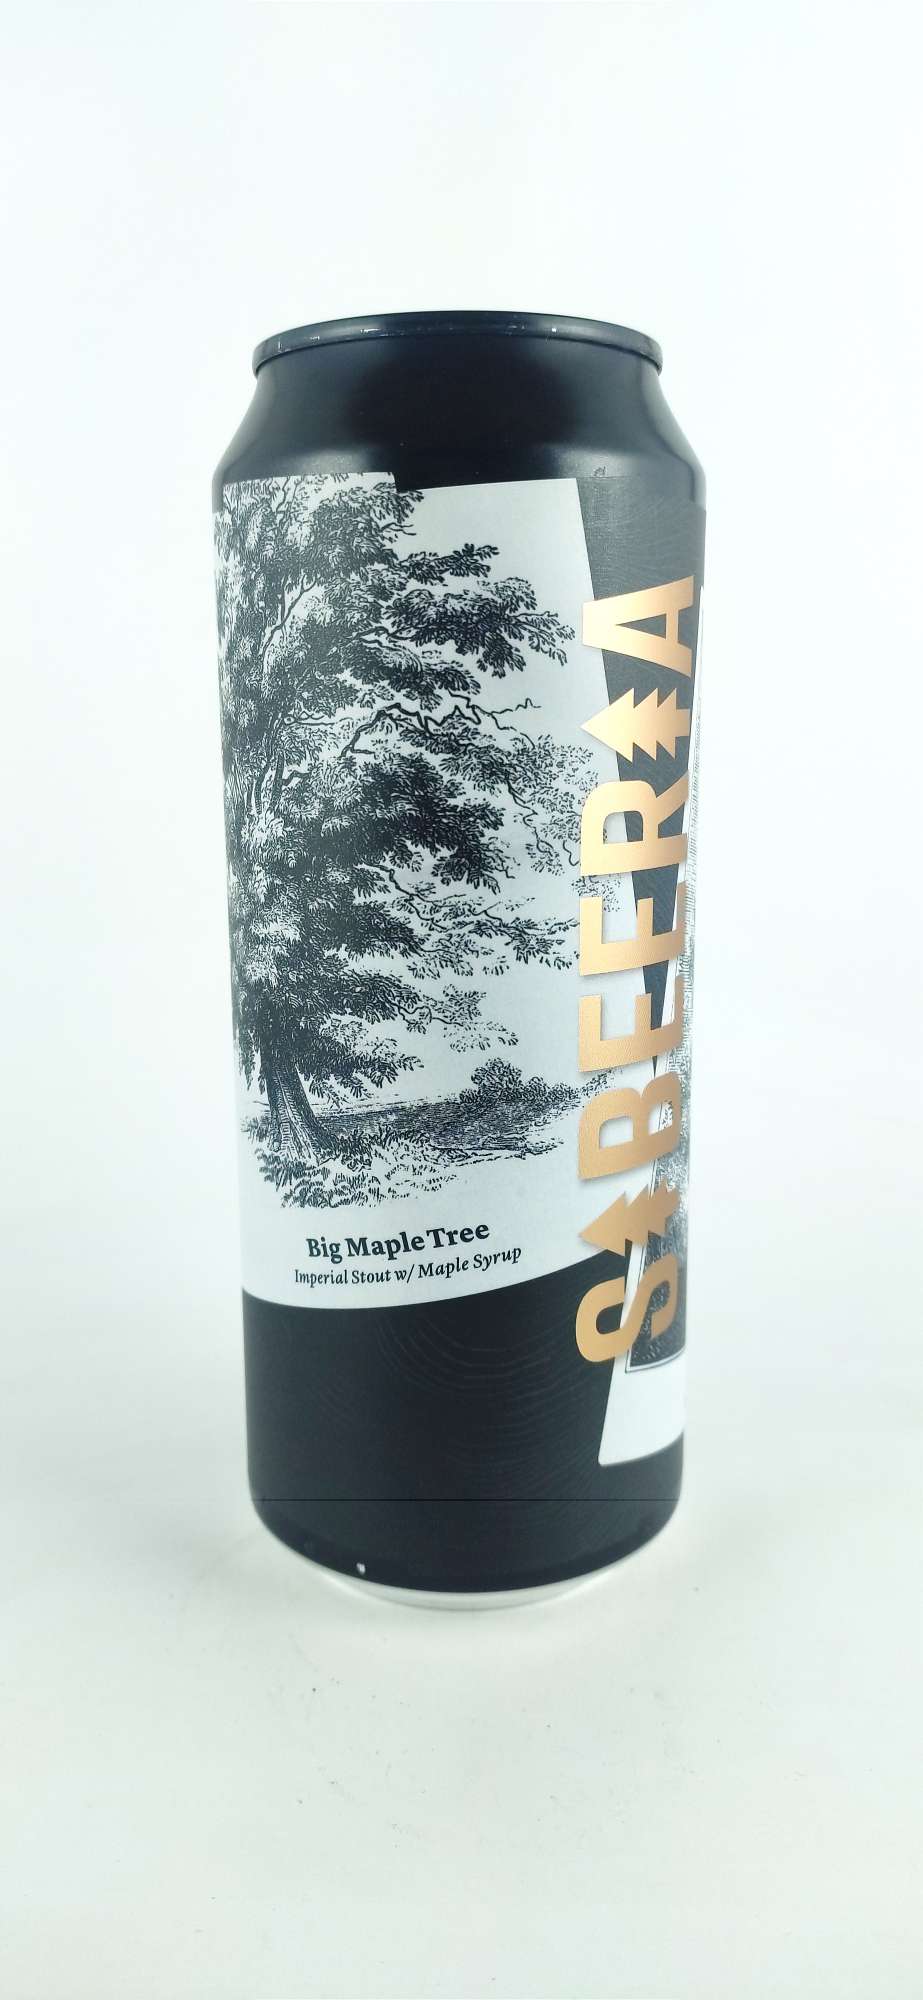 Sibeeria Big Maple Tree Imperial Stout w/ Maple Syrup 30°